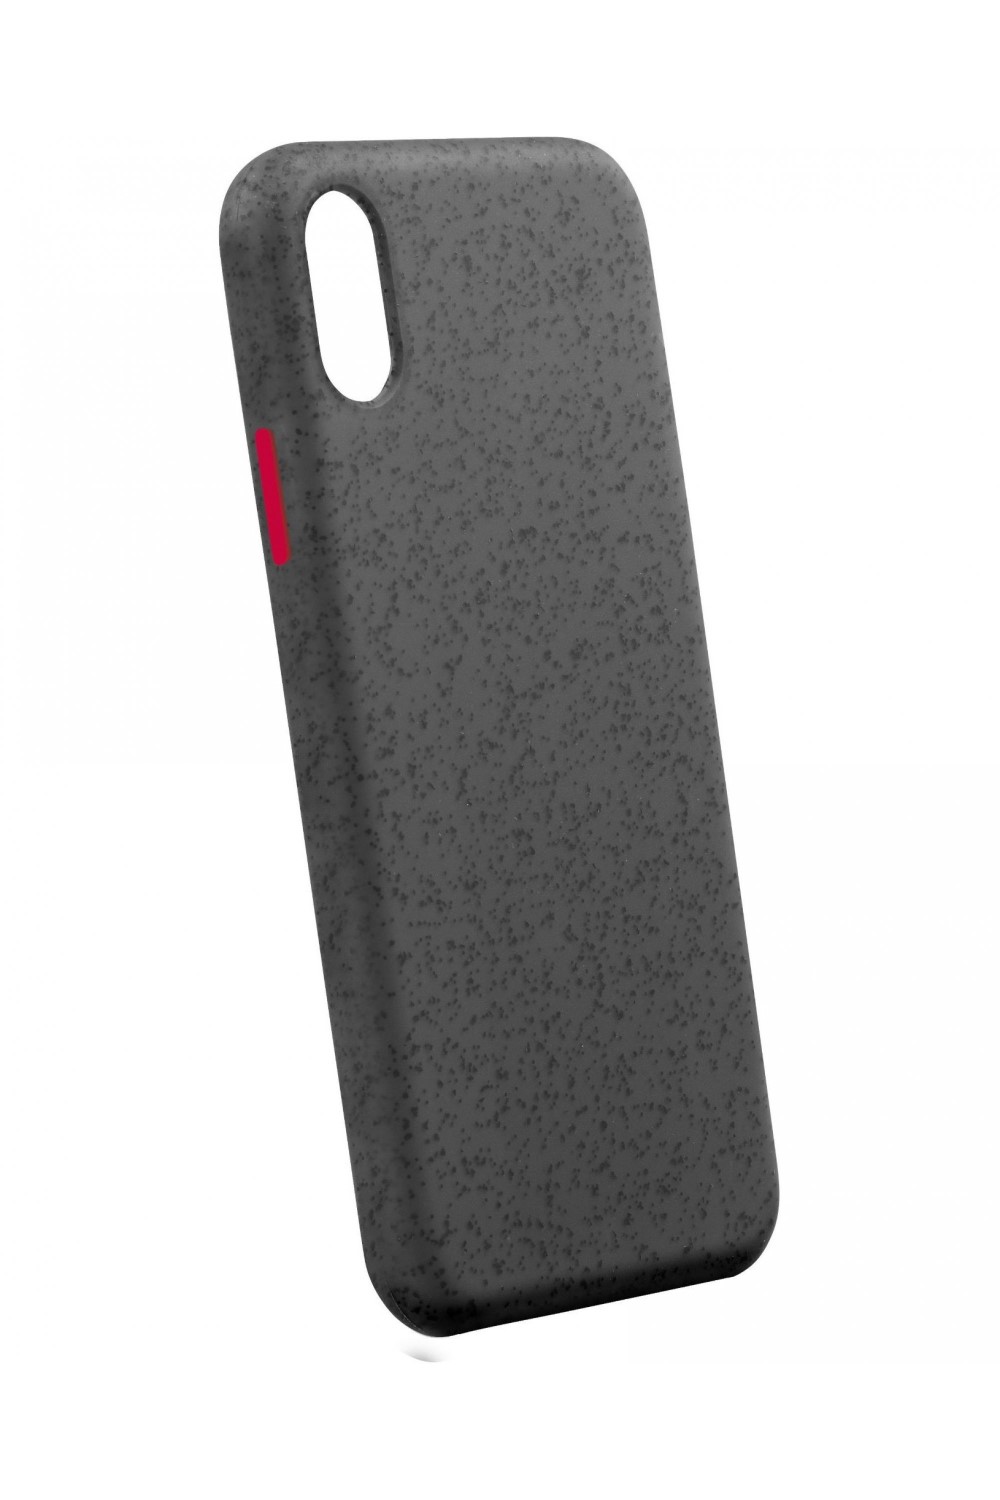 CellularLine Mineral Case Black for iPhone XS Max